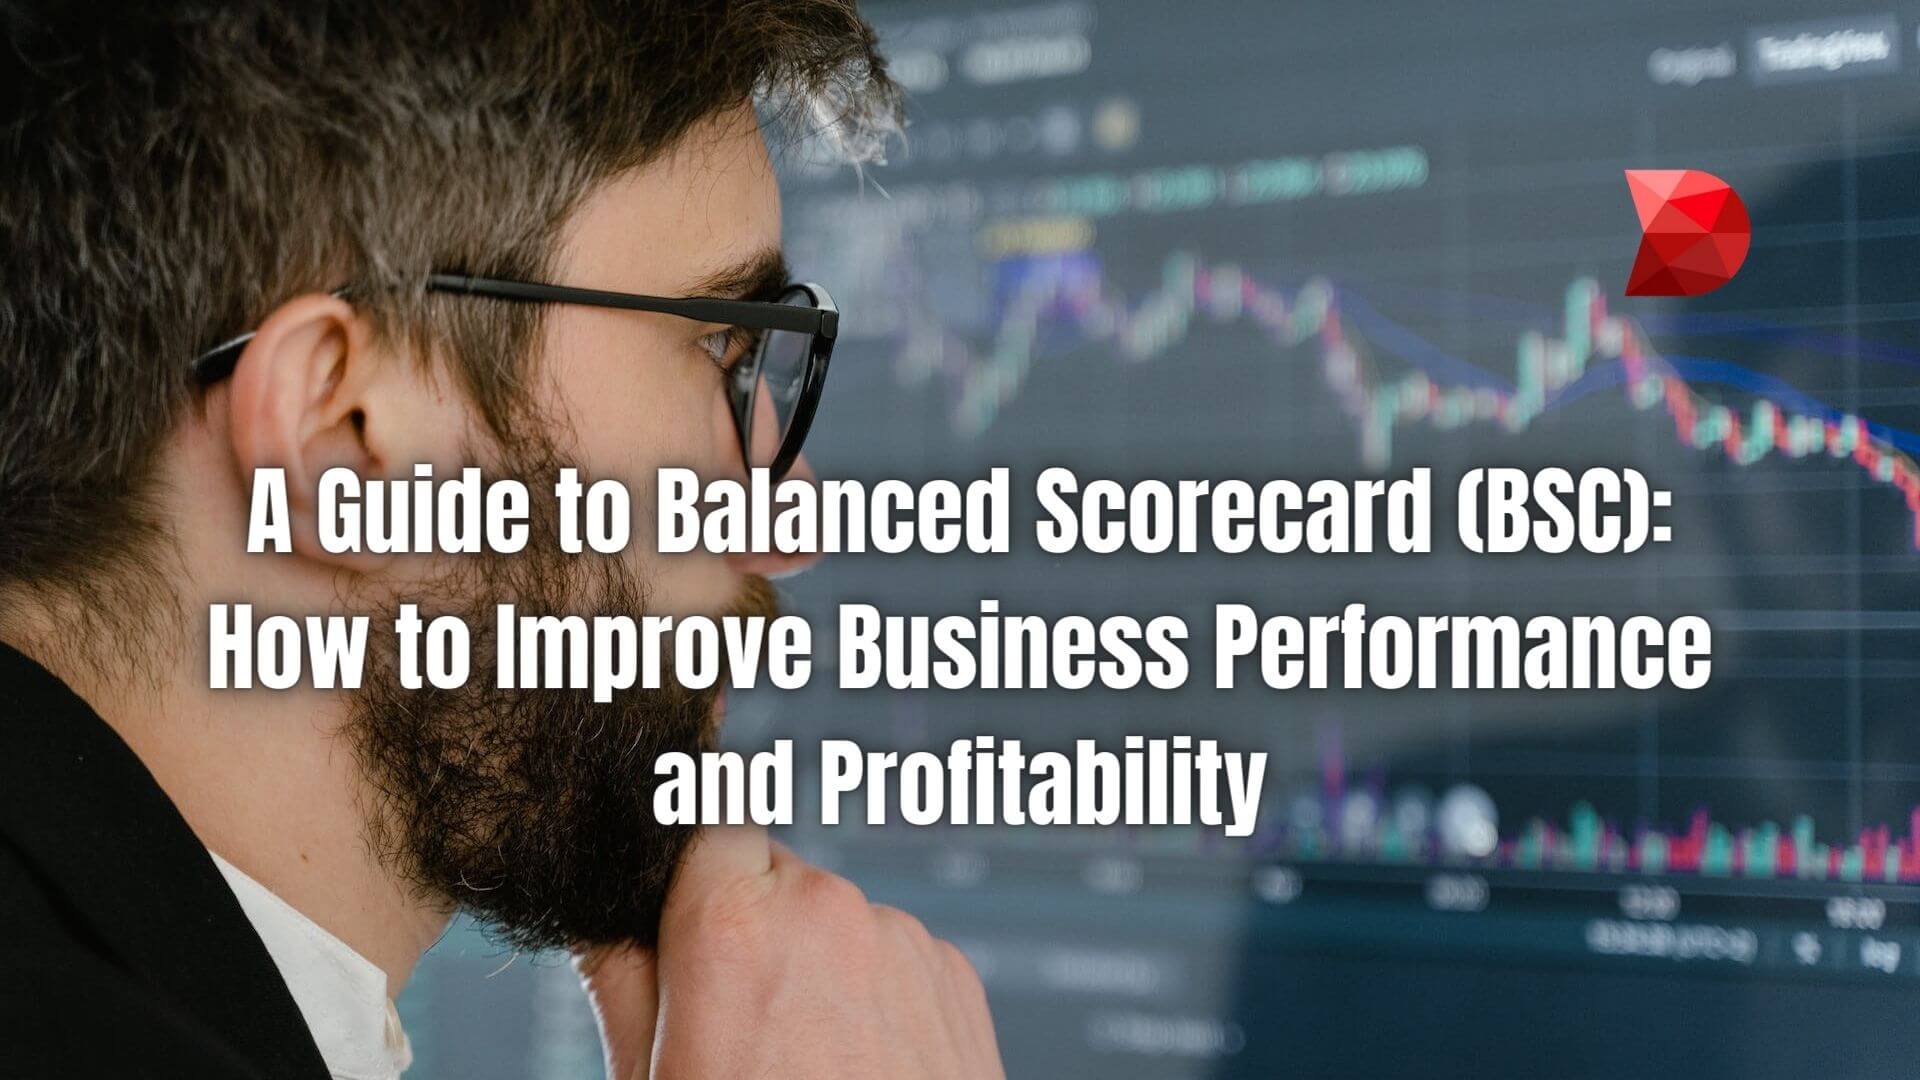 Boost business performance and profitability through strategic insights! Click here to explore our guide to Balanced Scorecard for success.